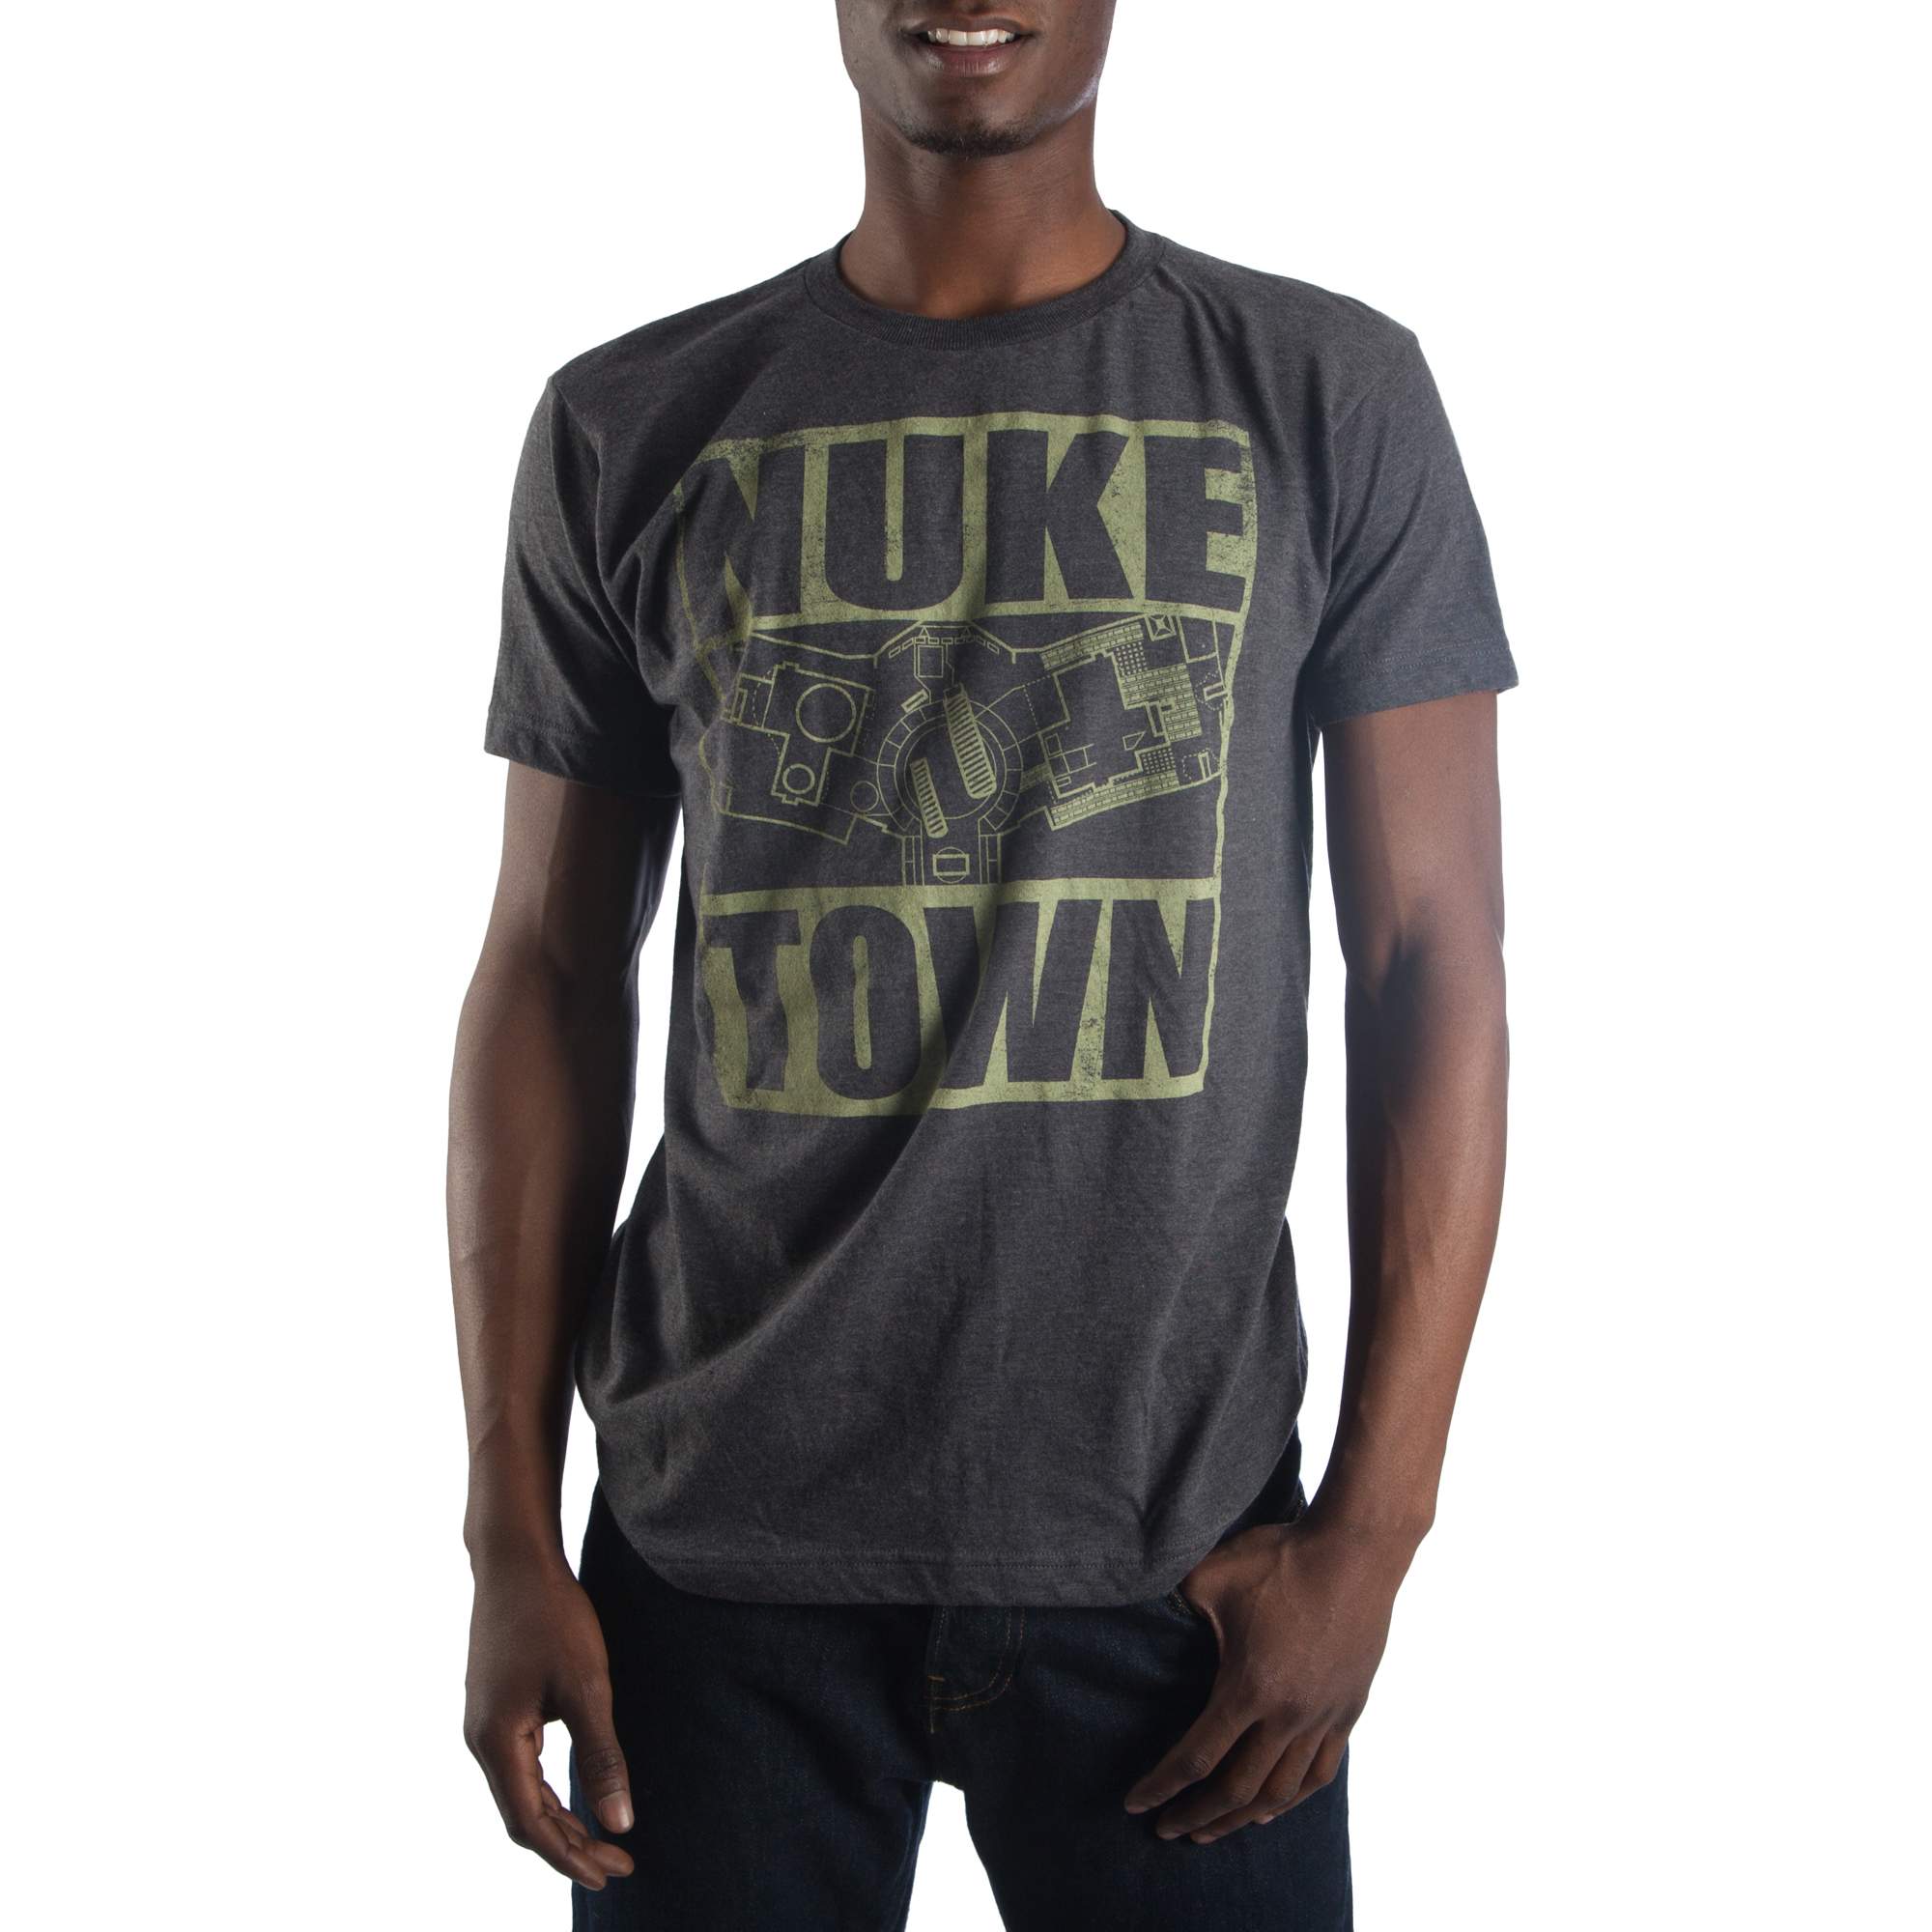 Call Of Duty Men's Nuke Town Map Short Sleeve Graphic T-Shirt, up to ...